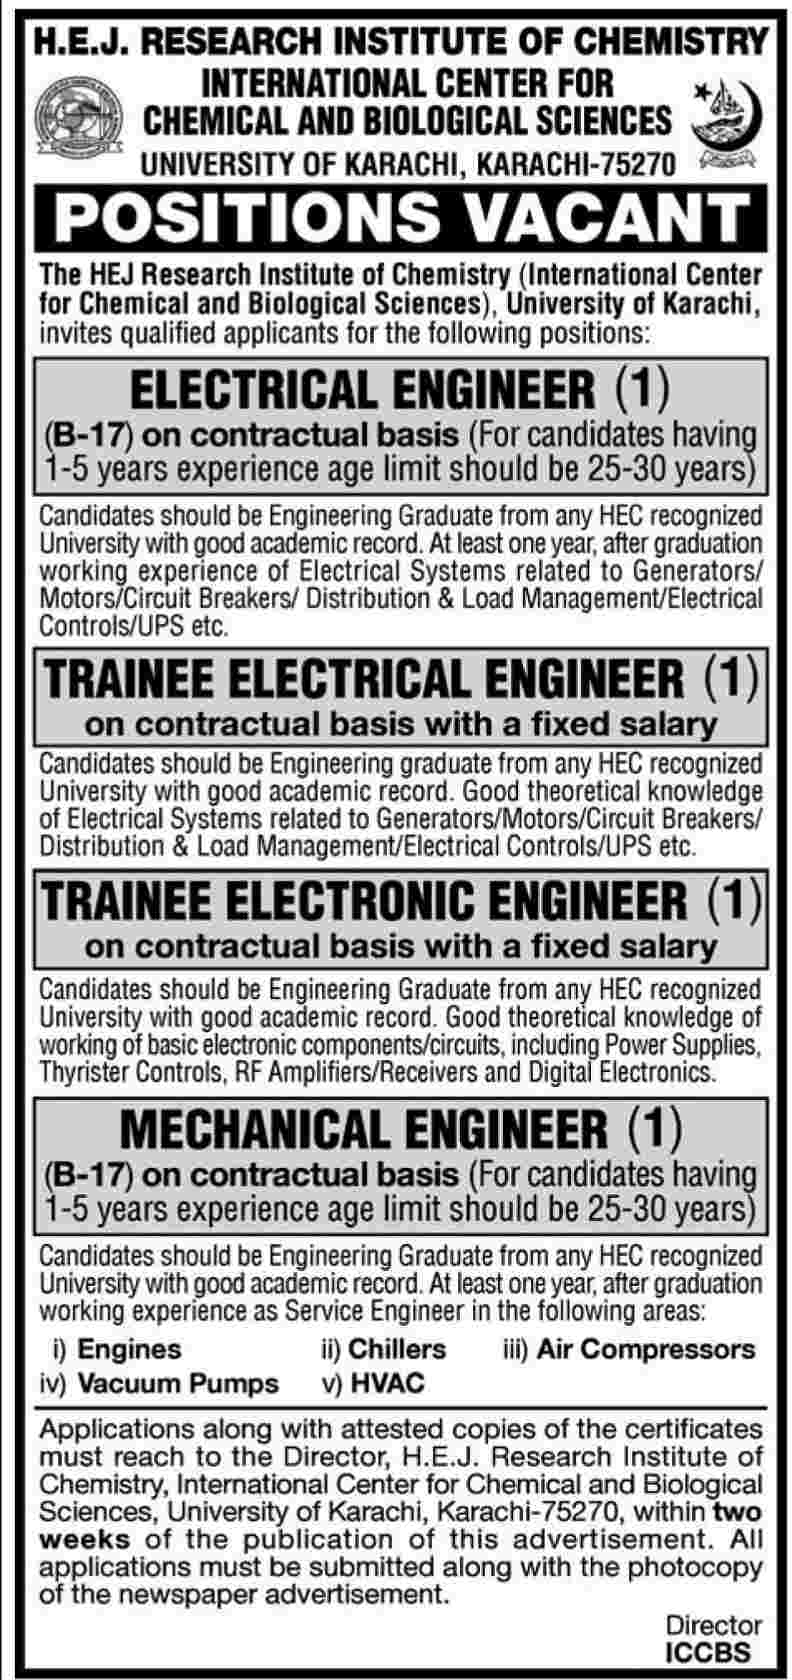 HEJ Research Institute of Chemistry, ICCBS, University of Karachi Jobs 2012-2013 Mechanical / Electrical Engineers